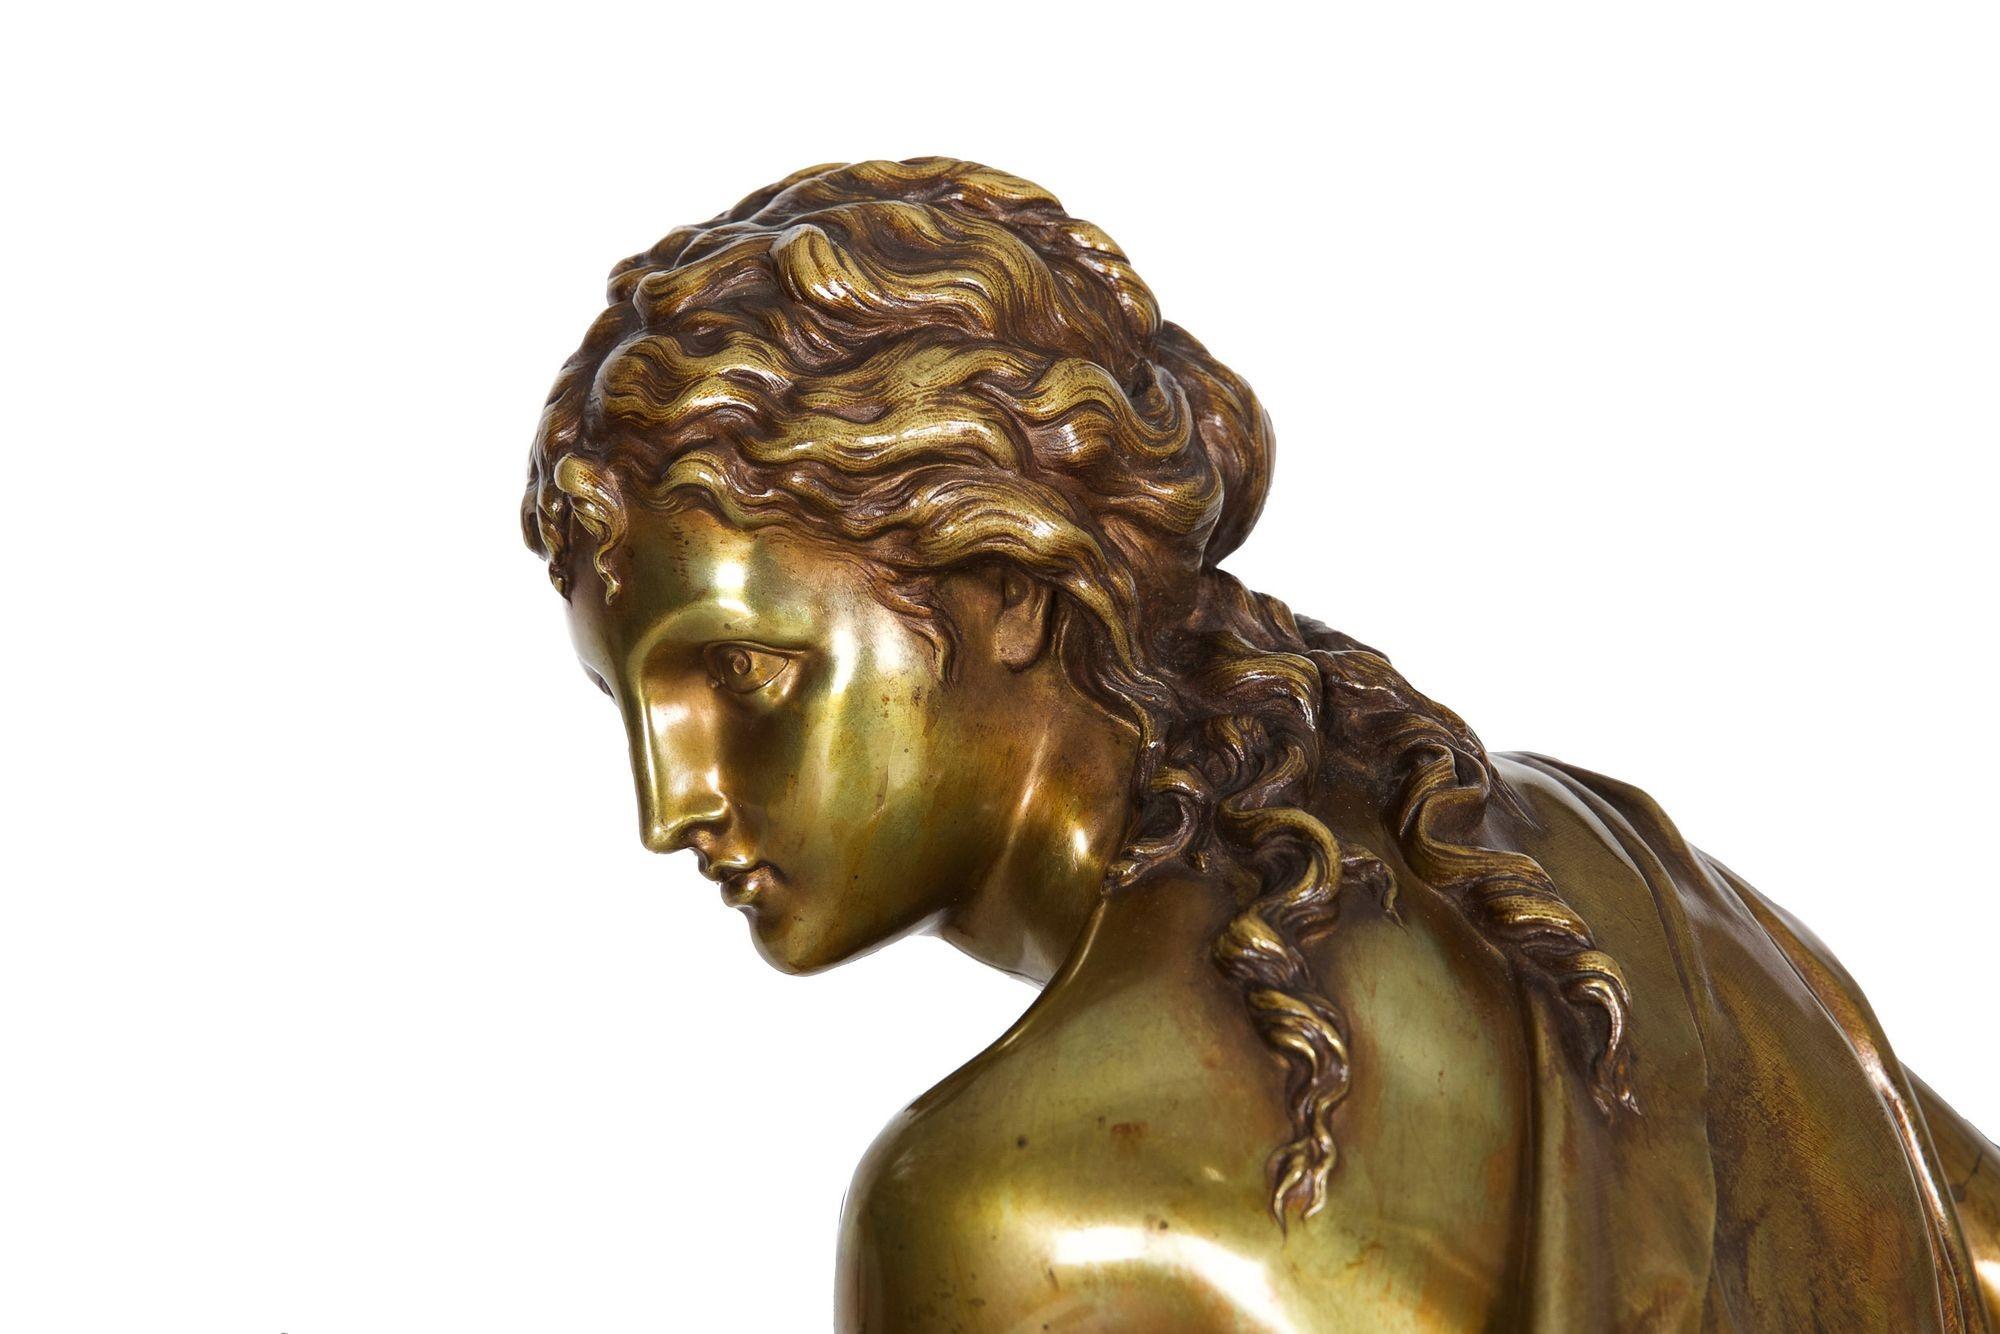 French Antique Bronze Sculpture “Seated Woman” by Etienne-Henri Dumaige, c.1880 For Sale 1